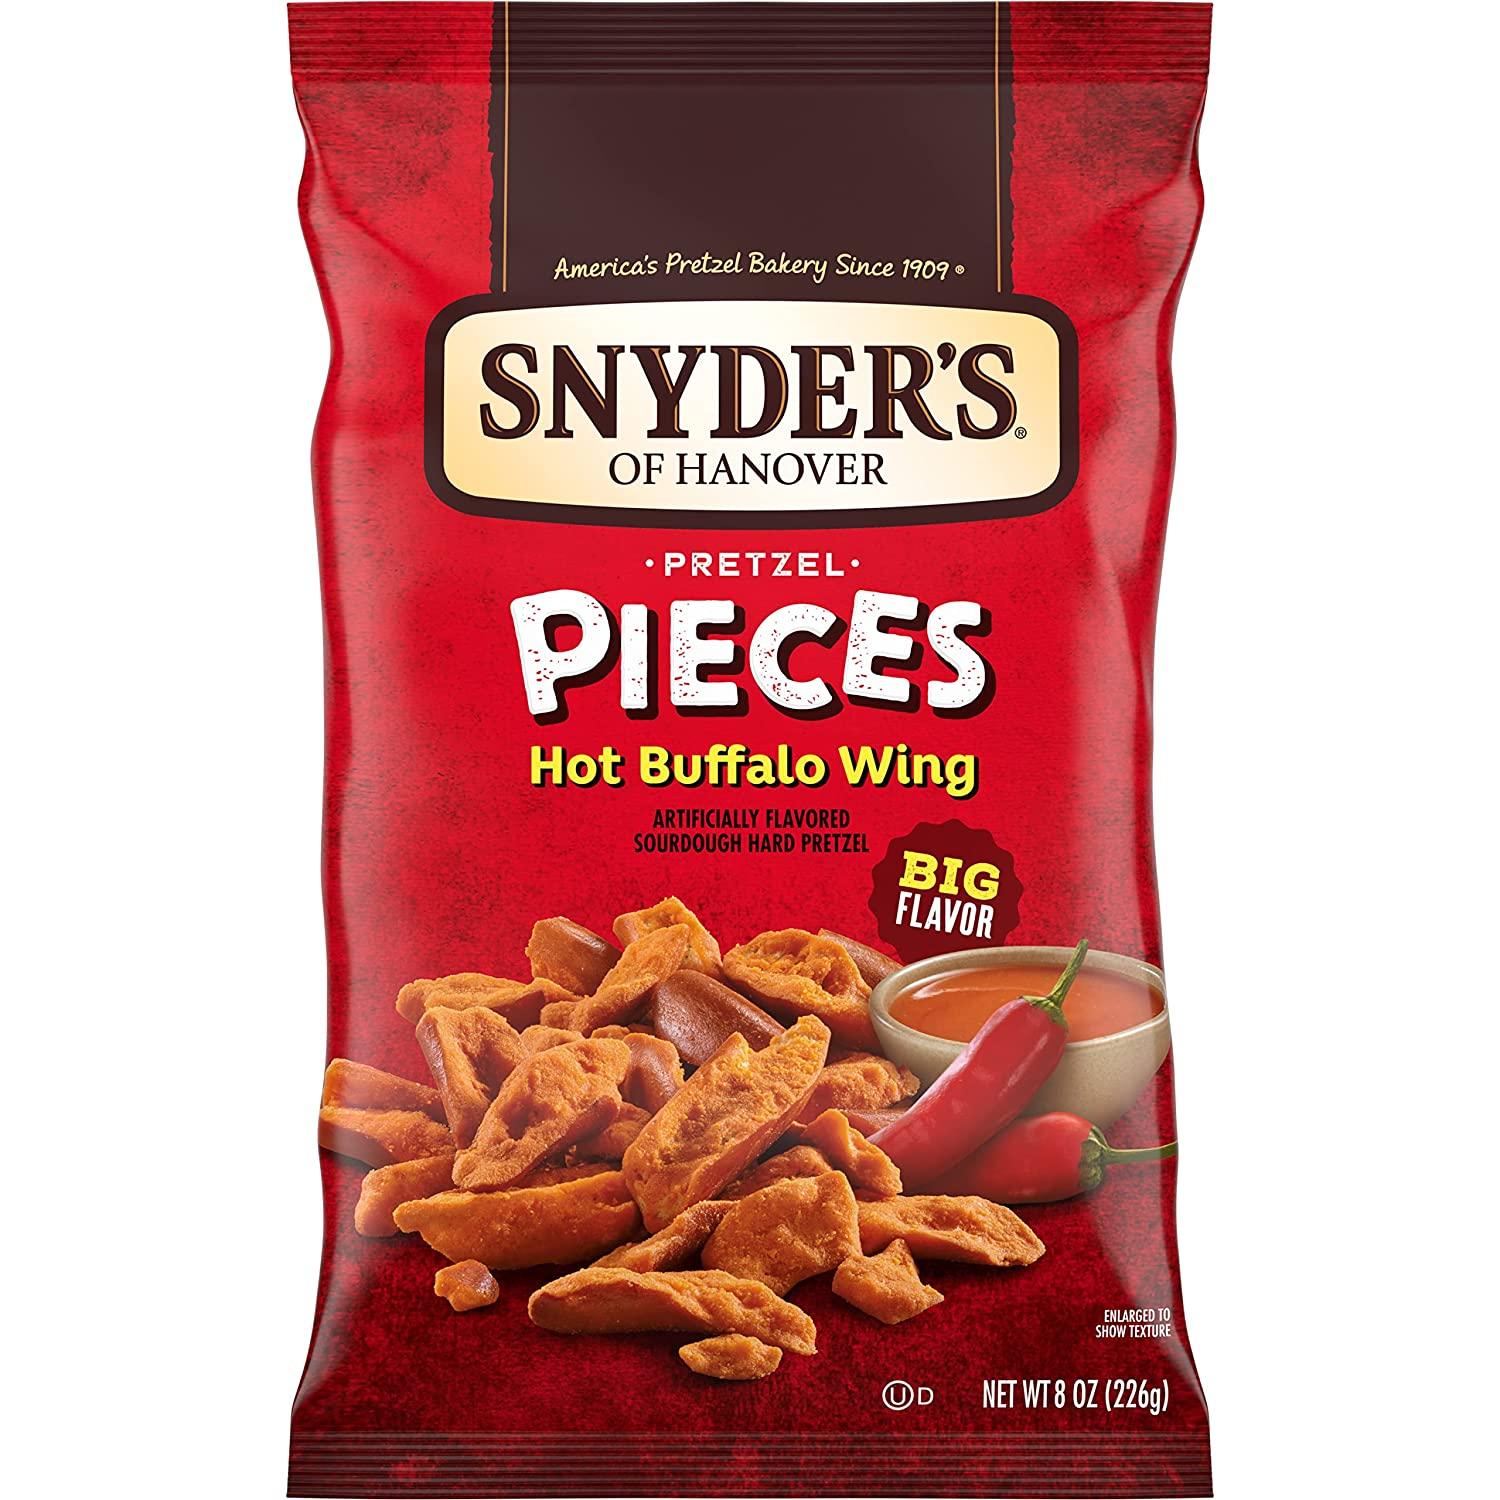 Snyders of Hanover Pretzel Pieces Hot Buffalo Wing 6 Pack for $9.49